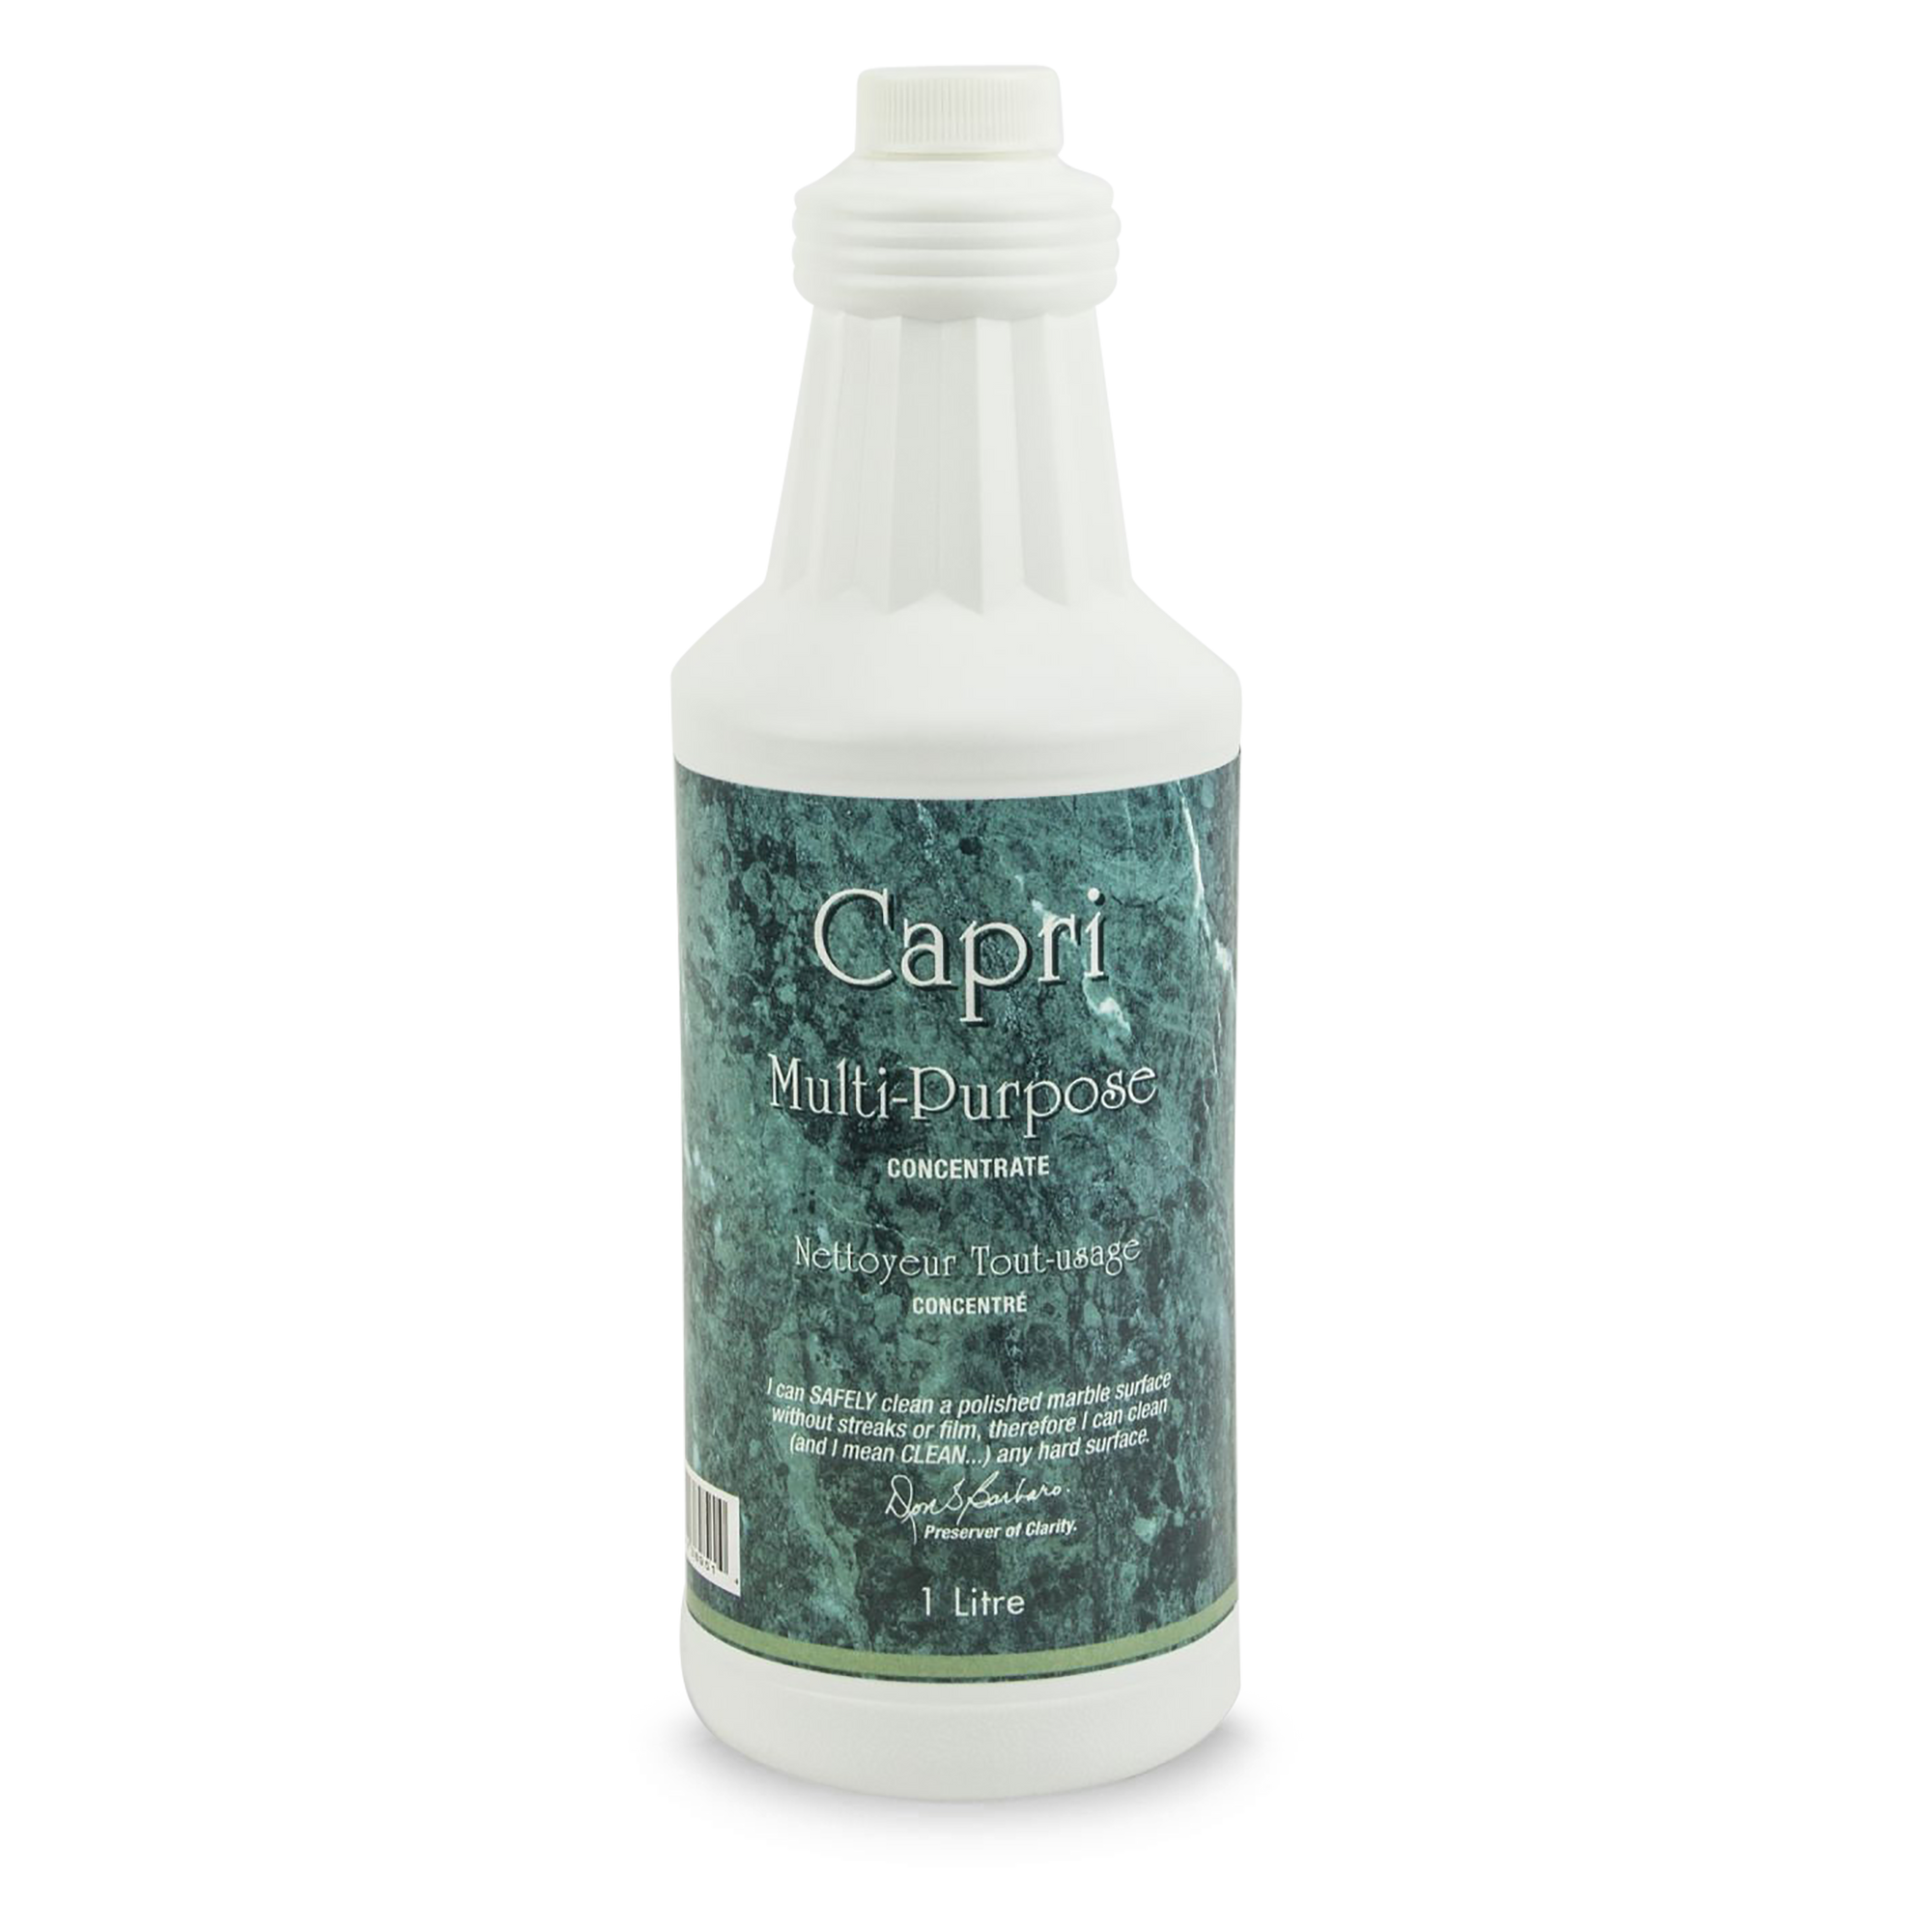 Capri Multi Purpose Cleaner is a concentrated biodegradable product that safely and easily cleans sensitive polished and hard surfaces.